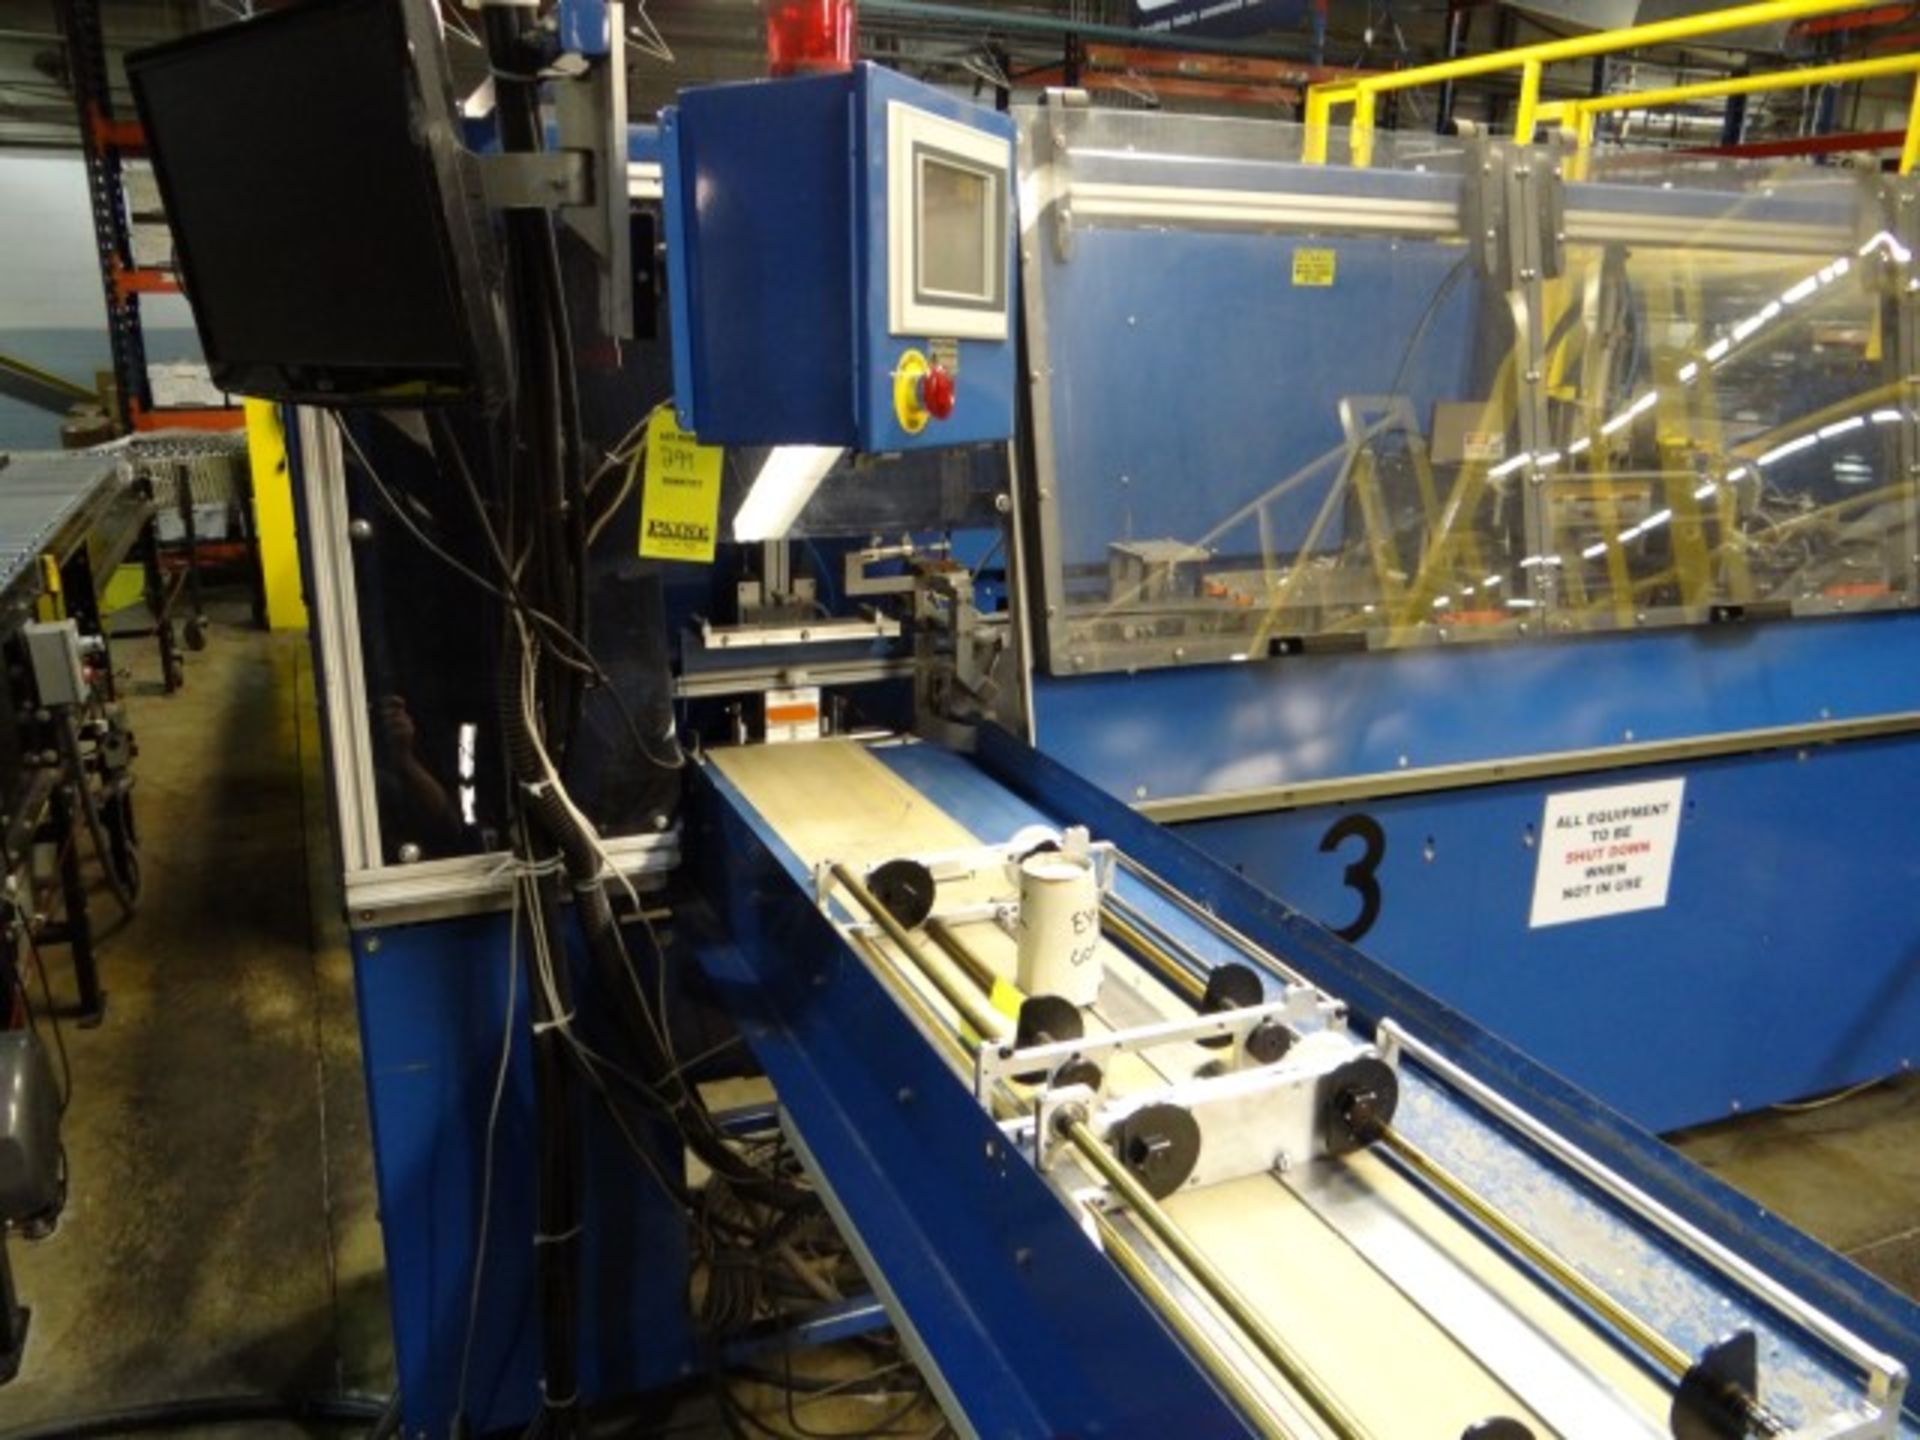 Tech King Cigarette Pick to Light System with 6 Pick Stations, Conveyors, Flow Racks, Box Tram and - Image 13 of 57